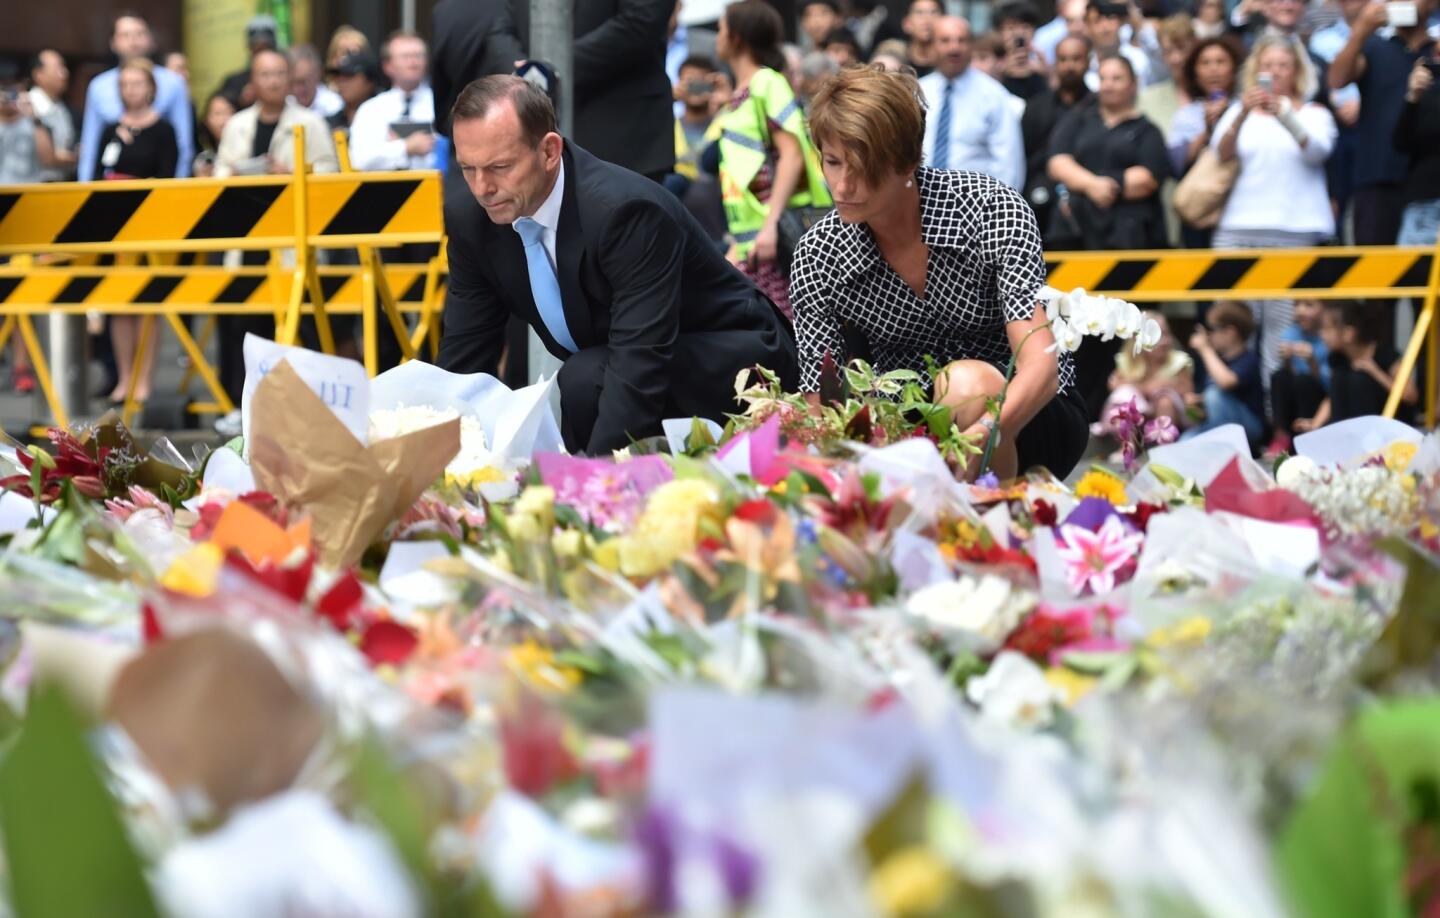 Prime Minister Tony Abbott and his wife, Margaret, place wreaths Dec. 16 at a makeshift memorial near the scene of a fatal hostage siege in the heart of Sydney's financial district.